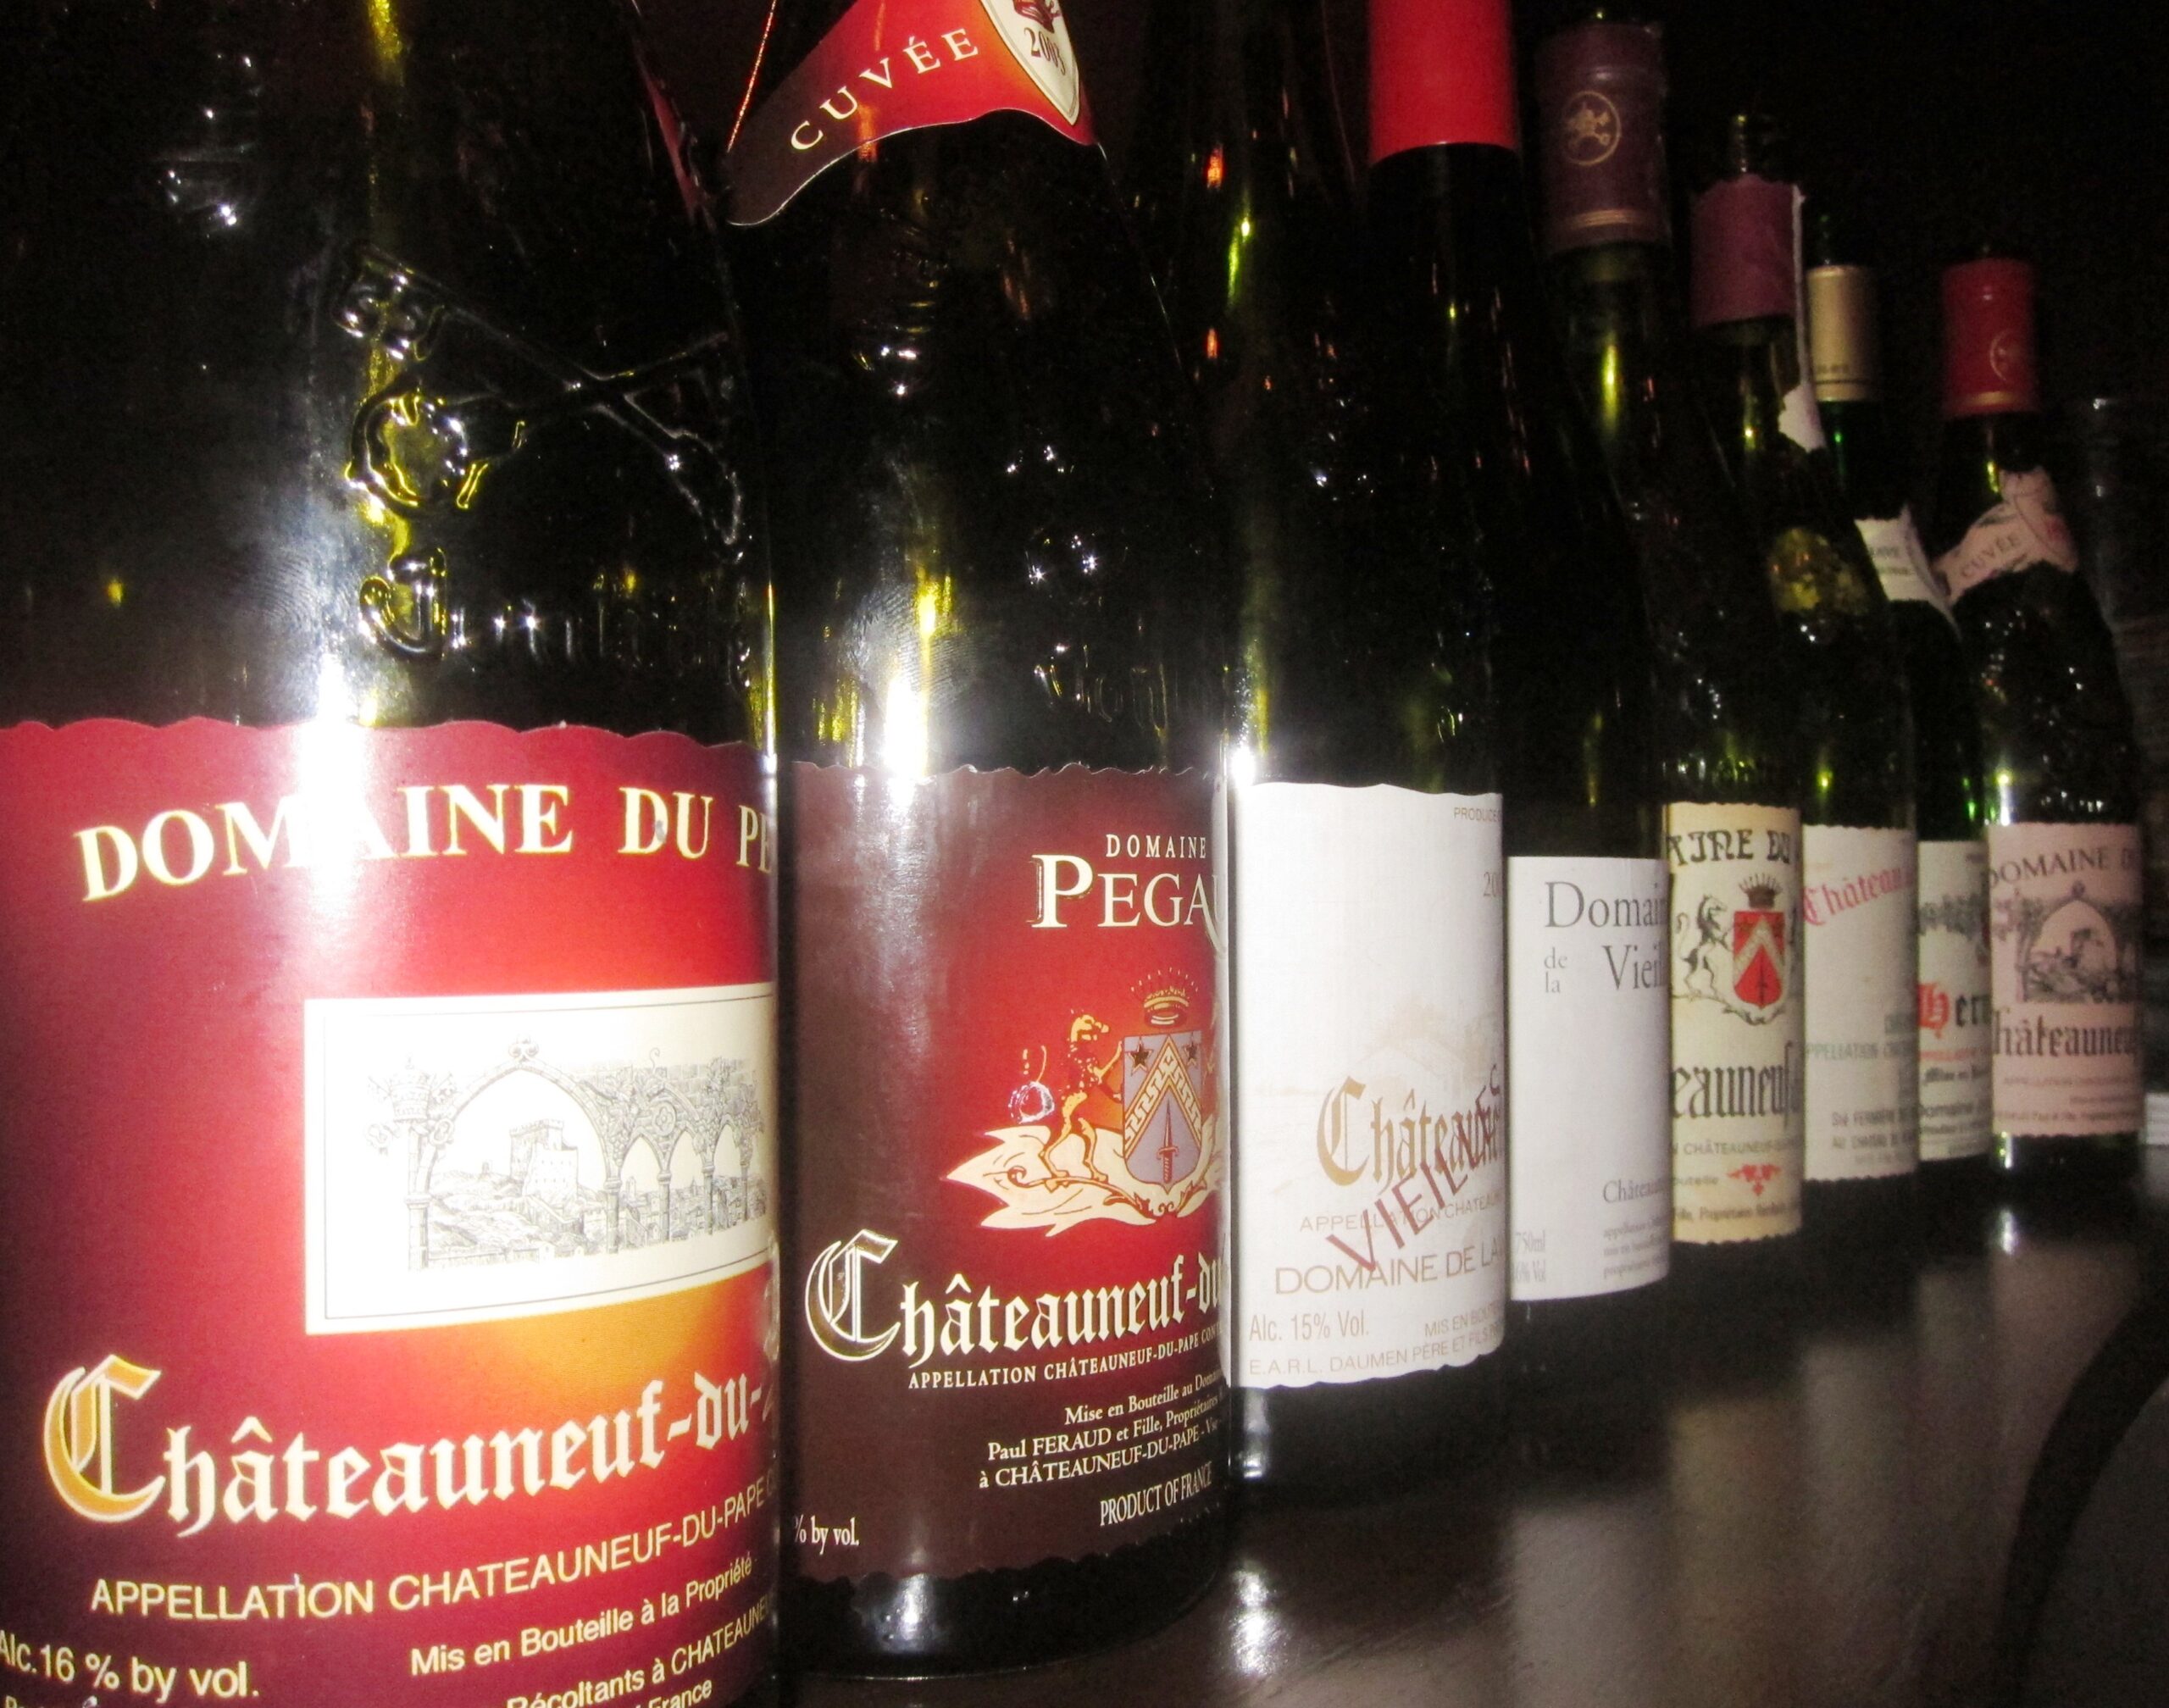 Chateauneuf du Pape Rhone Wines in London at The Ledbury